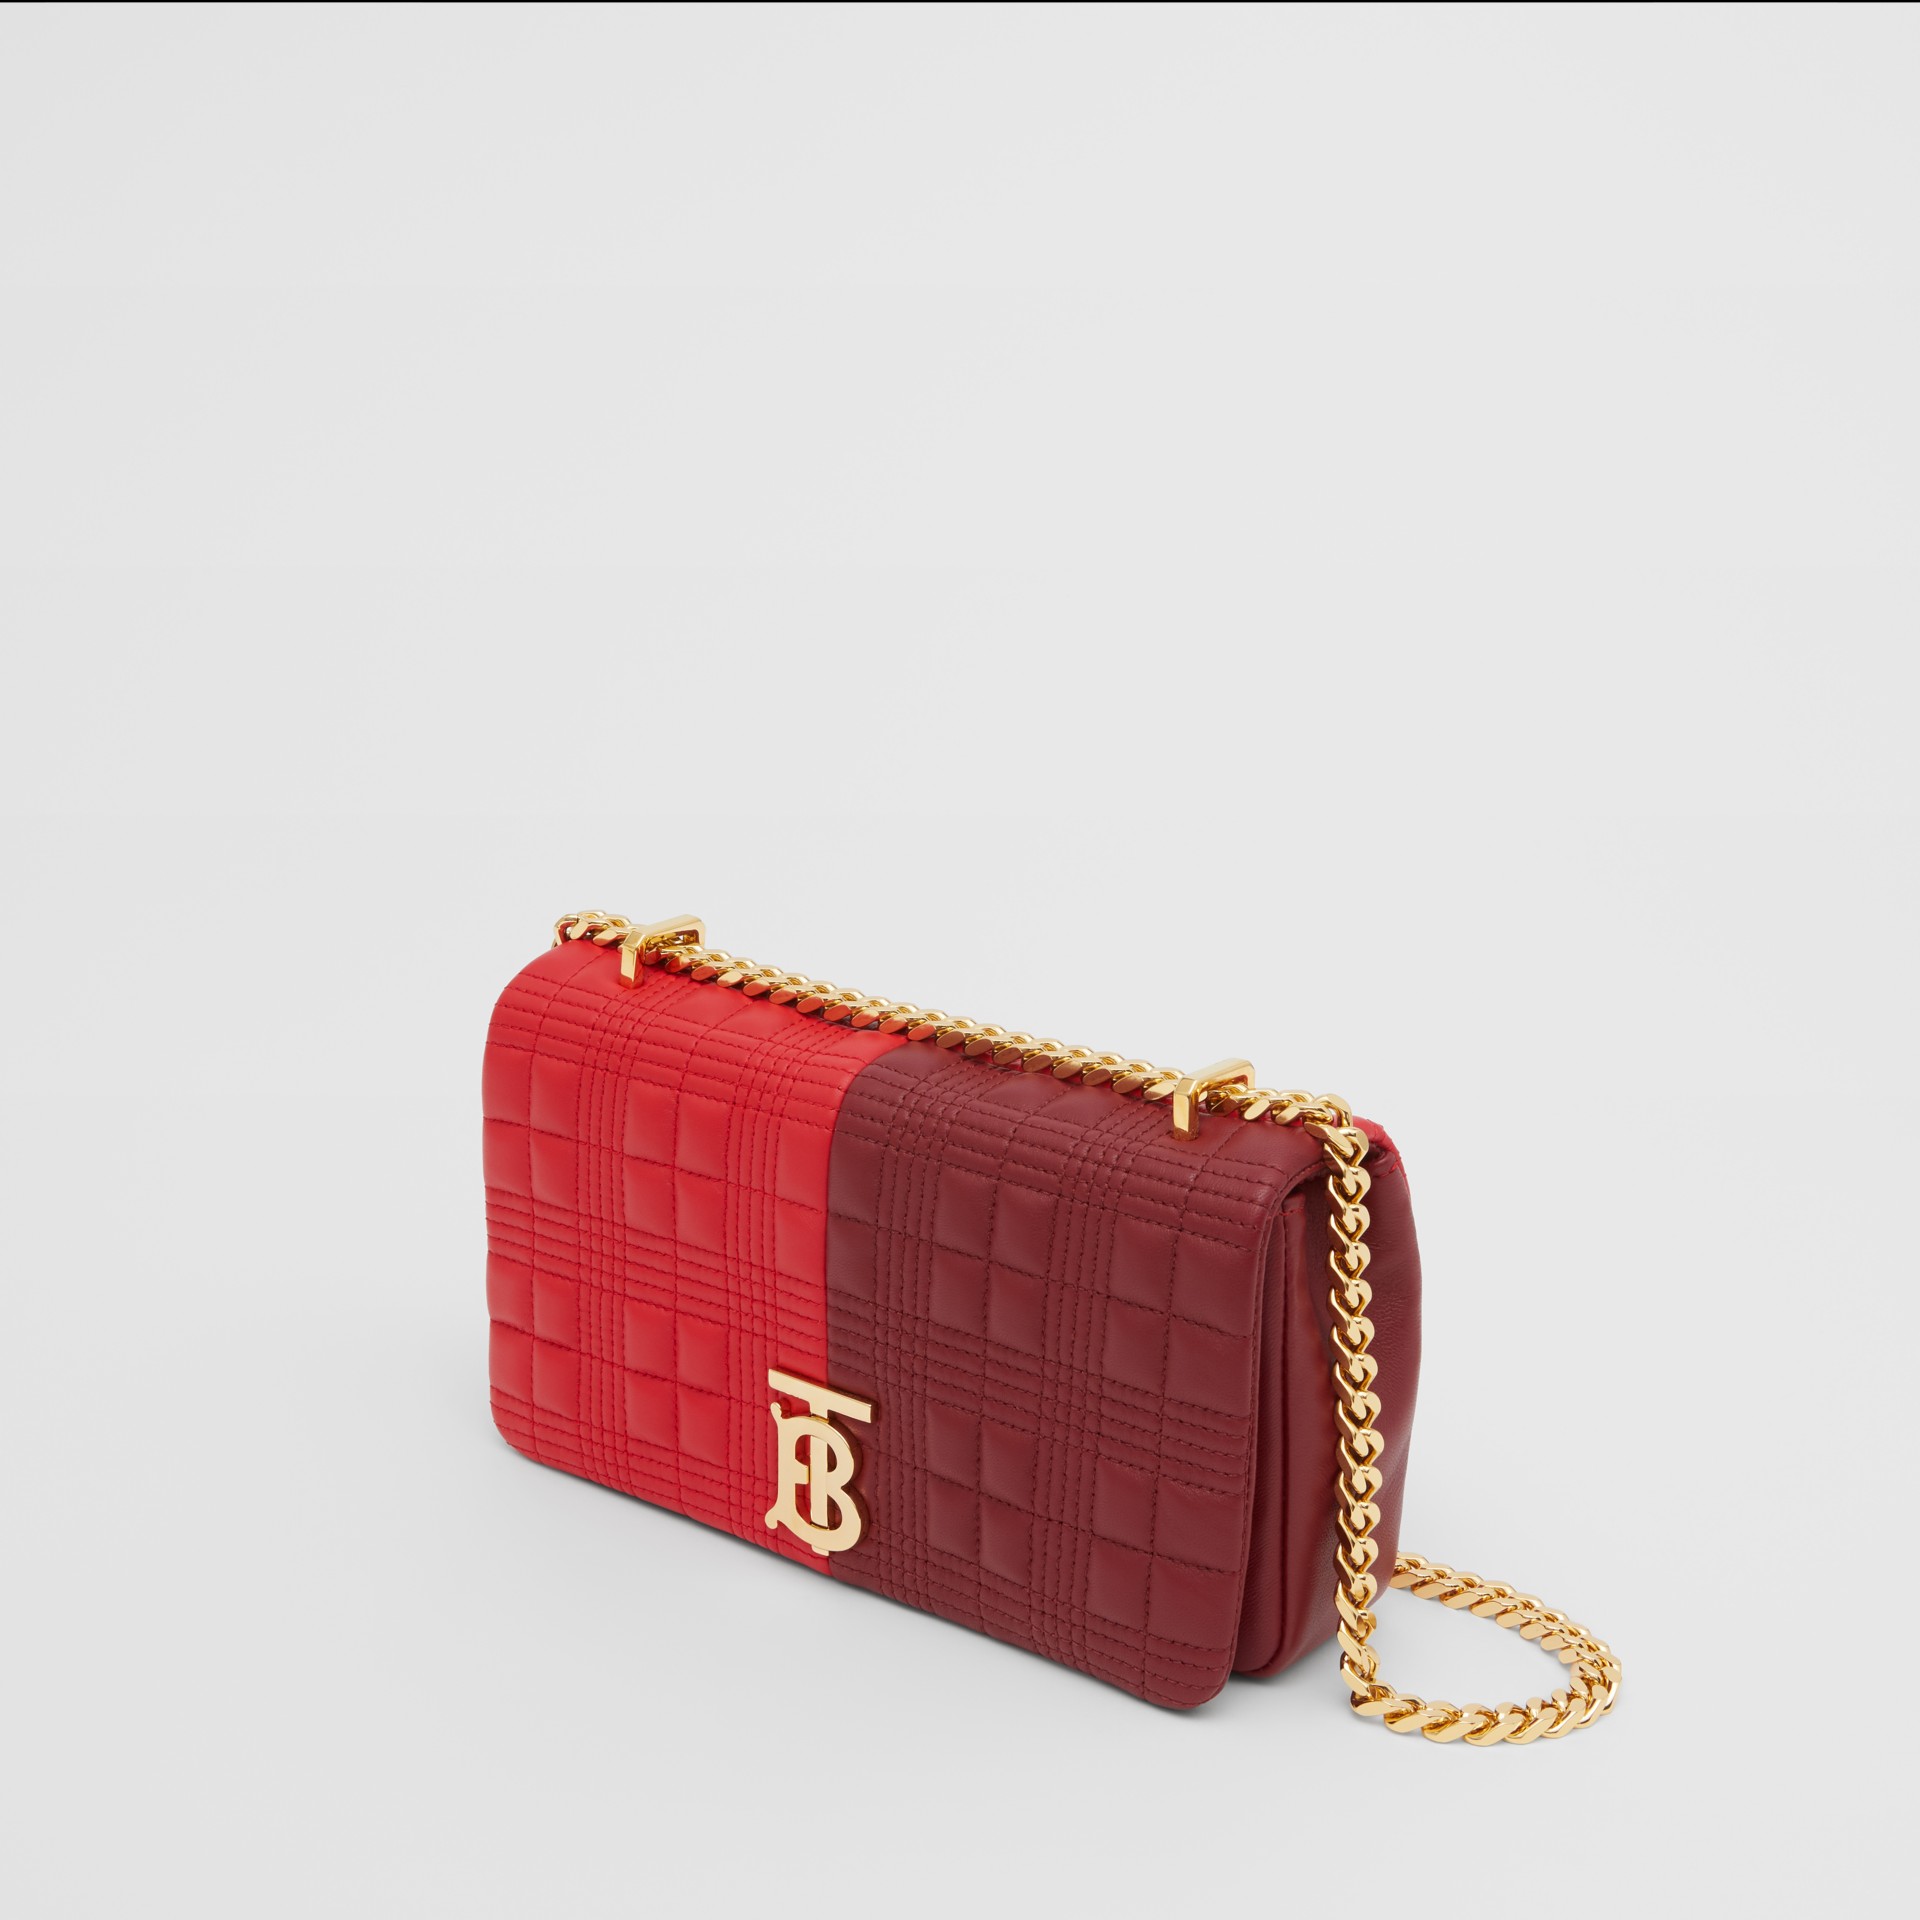 Small Quilted Colour Block Lambskin Lola Bag in Bright Red/burgundy ...